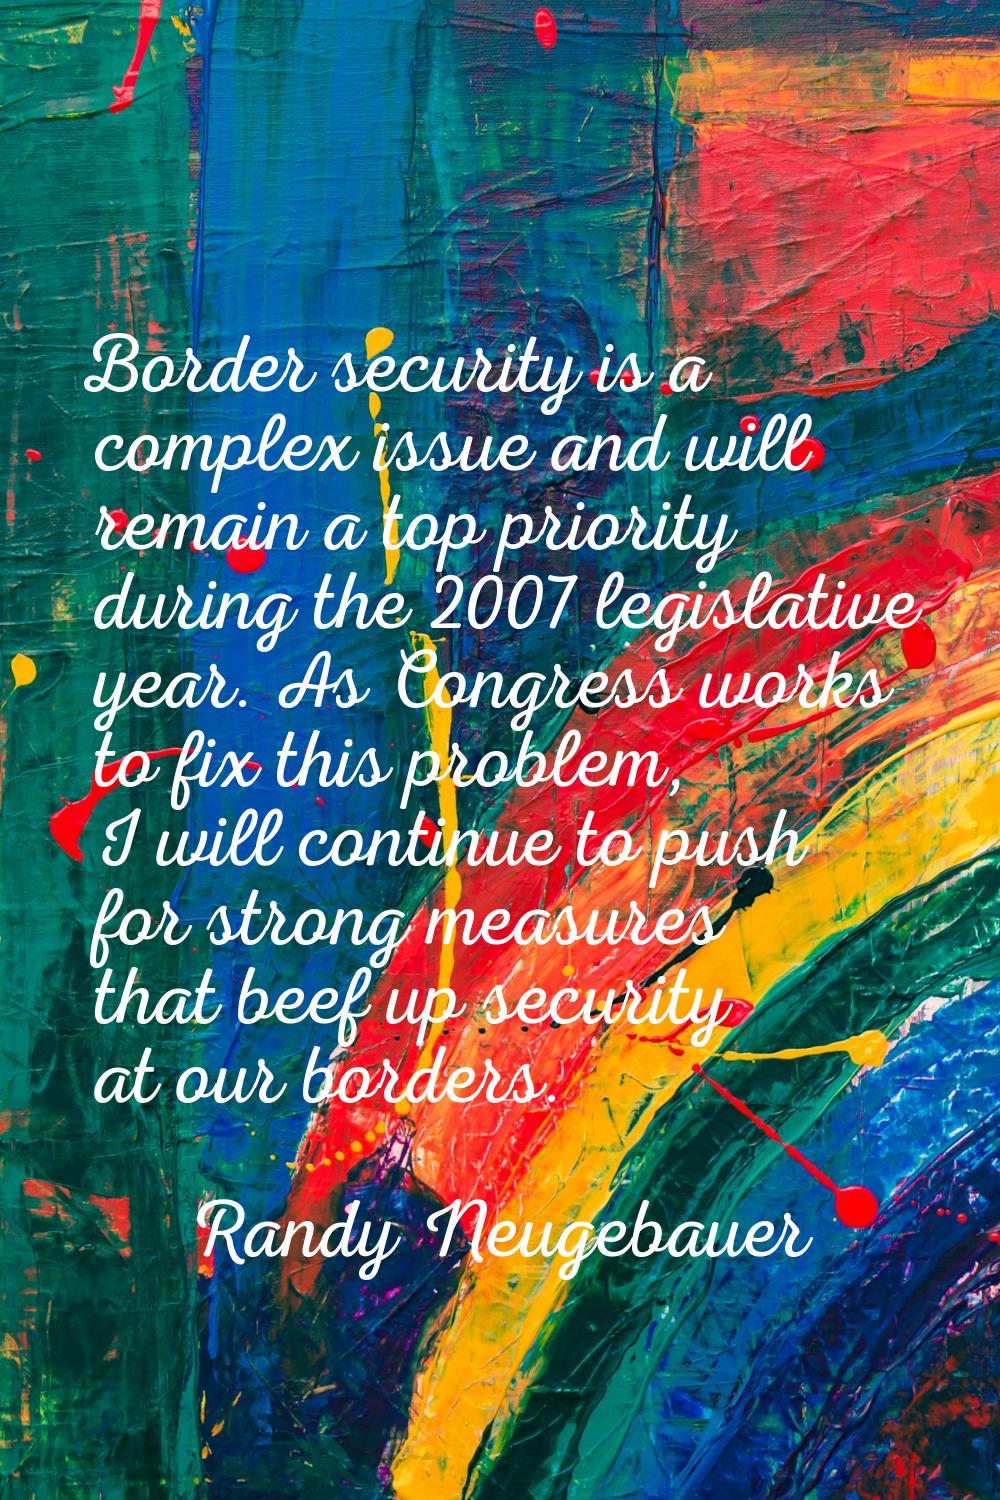 Border security is a complex issue and will remain a top priority during the 2007 legislative year.